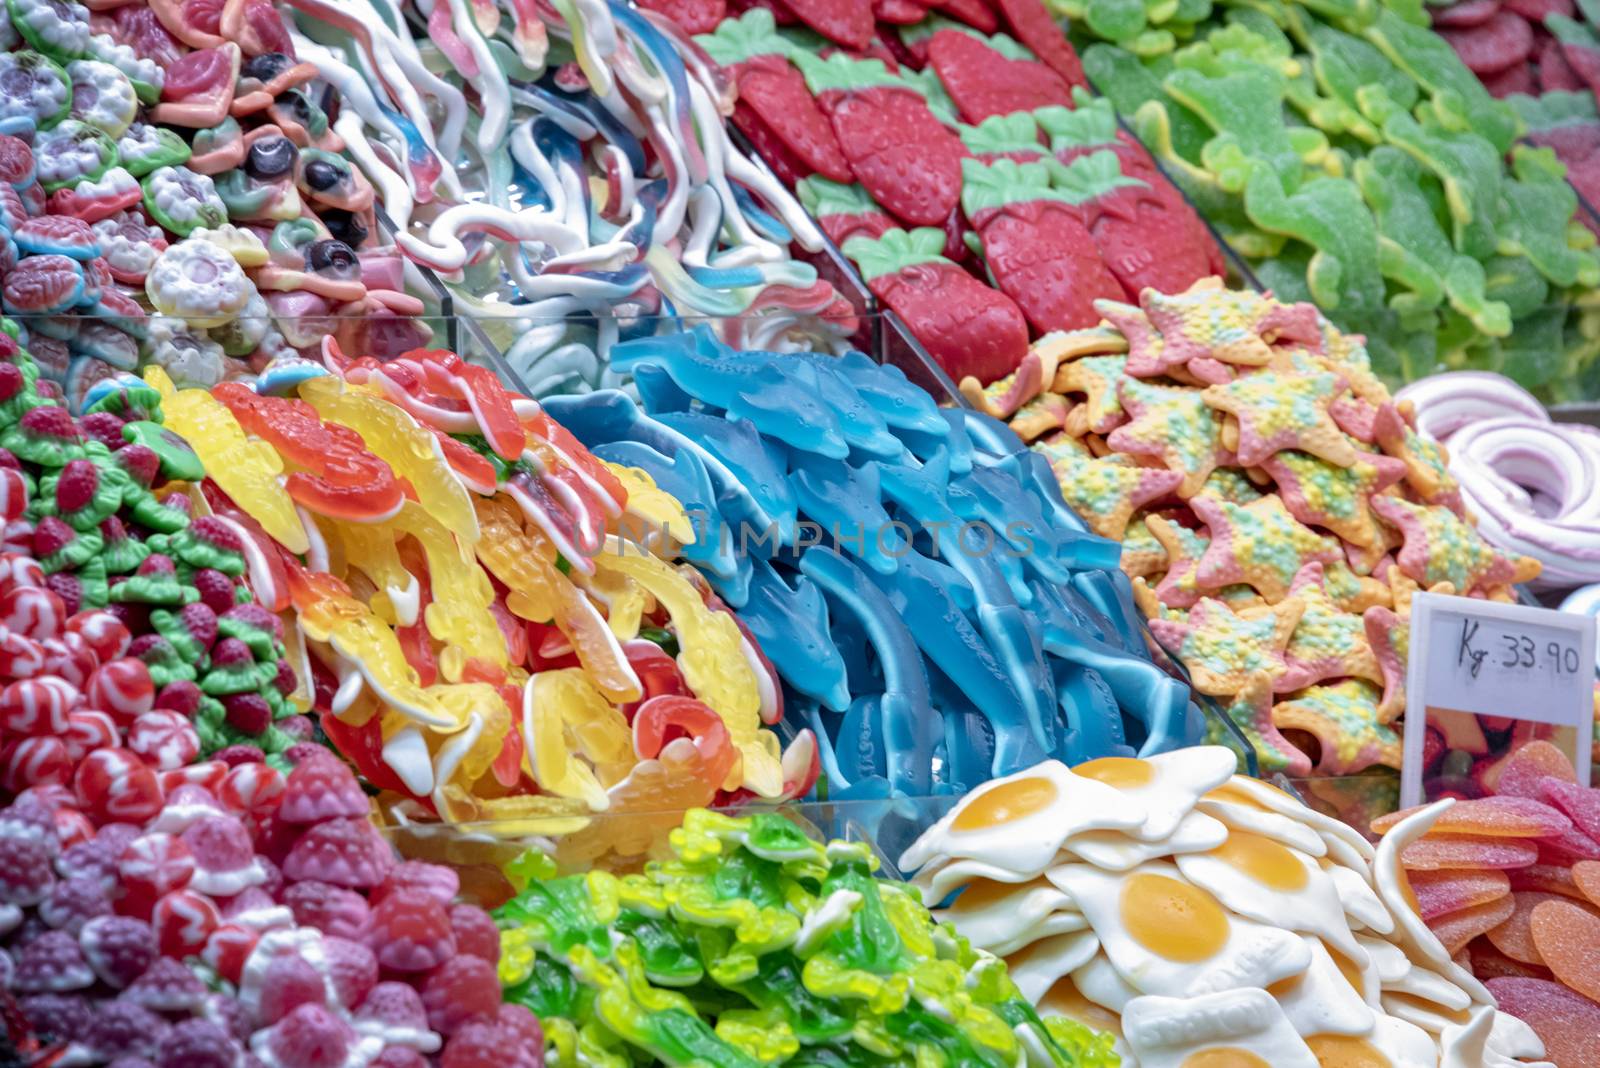 Spain, Bacelona - May 2018: Market stall selling brightly coloured sweets